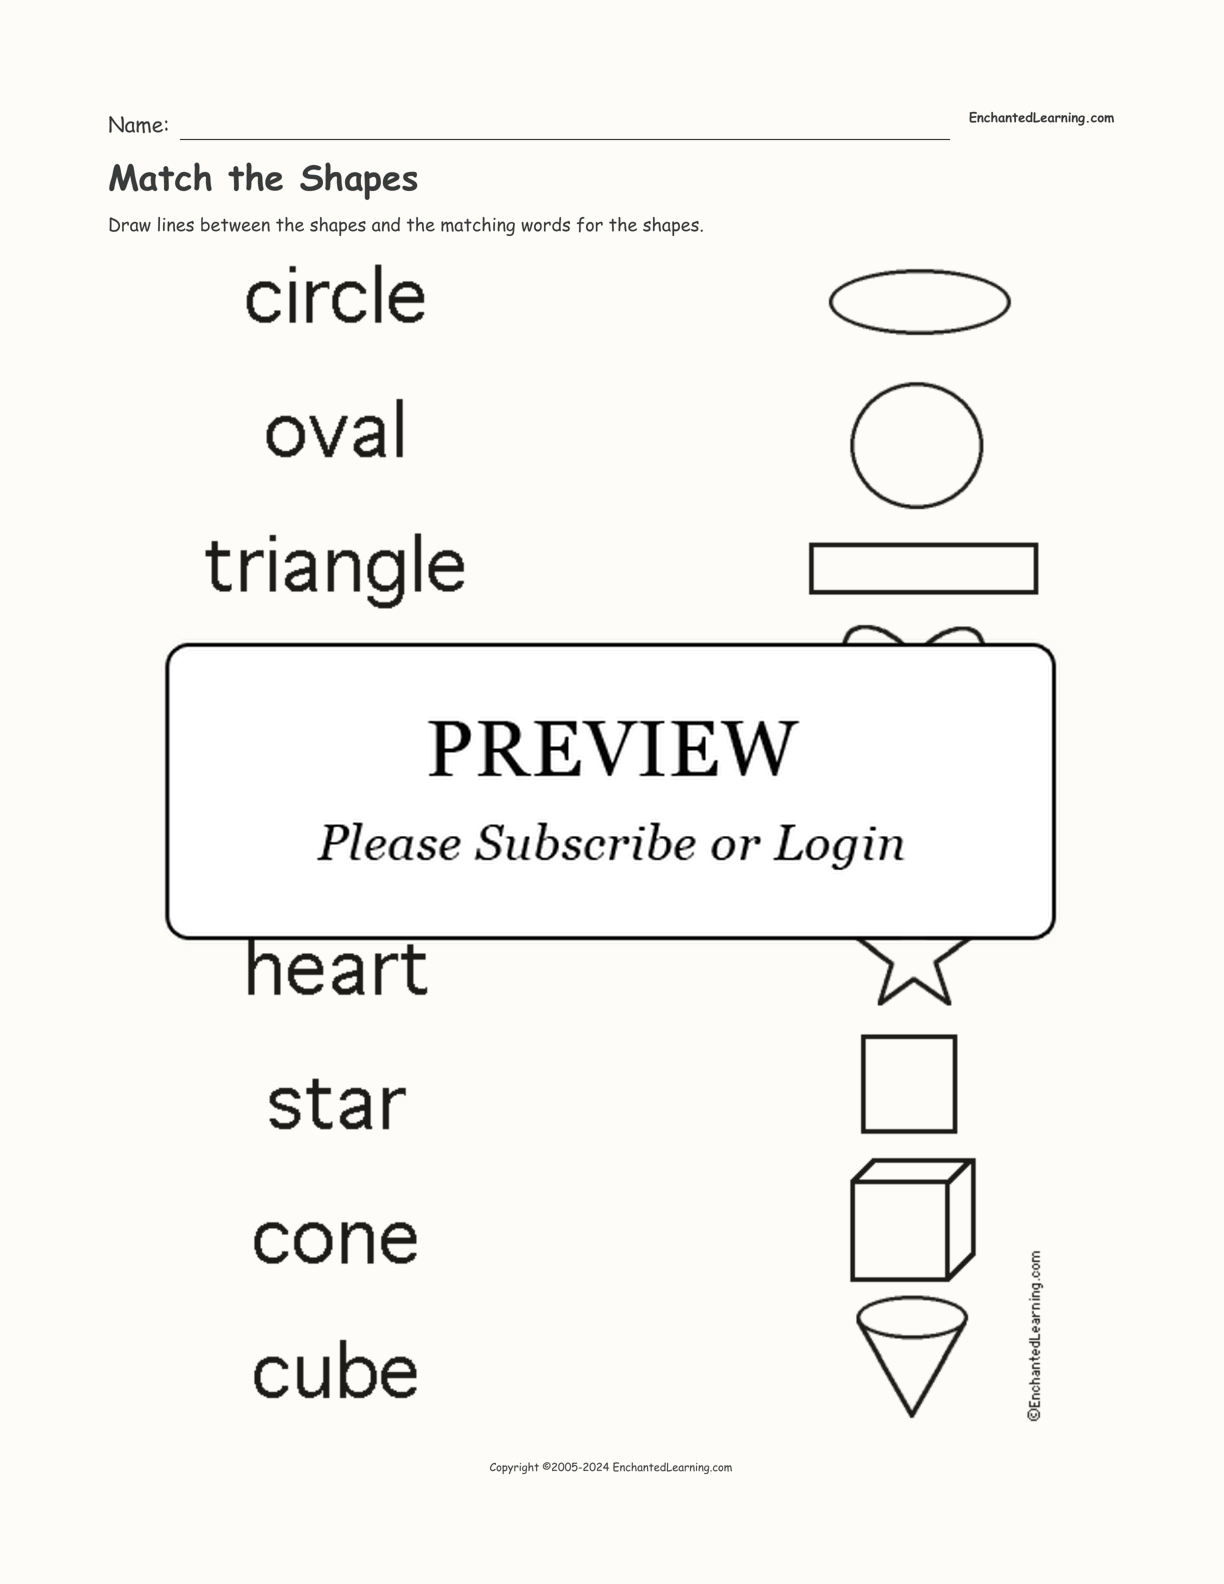 Match the Shapes interactive worksheet page 1